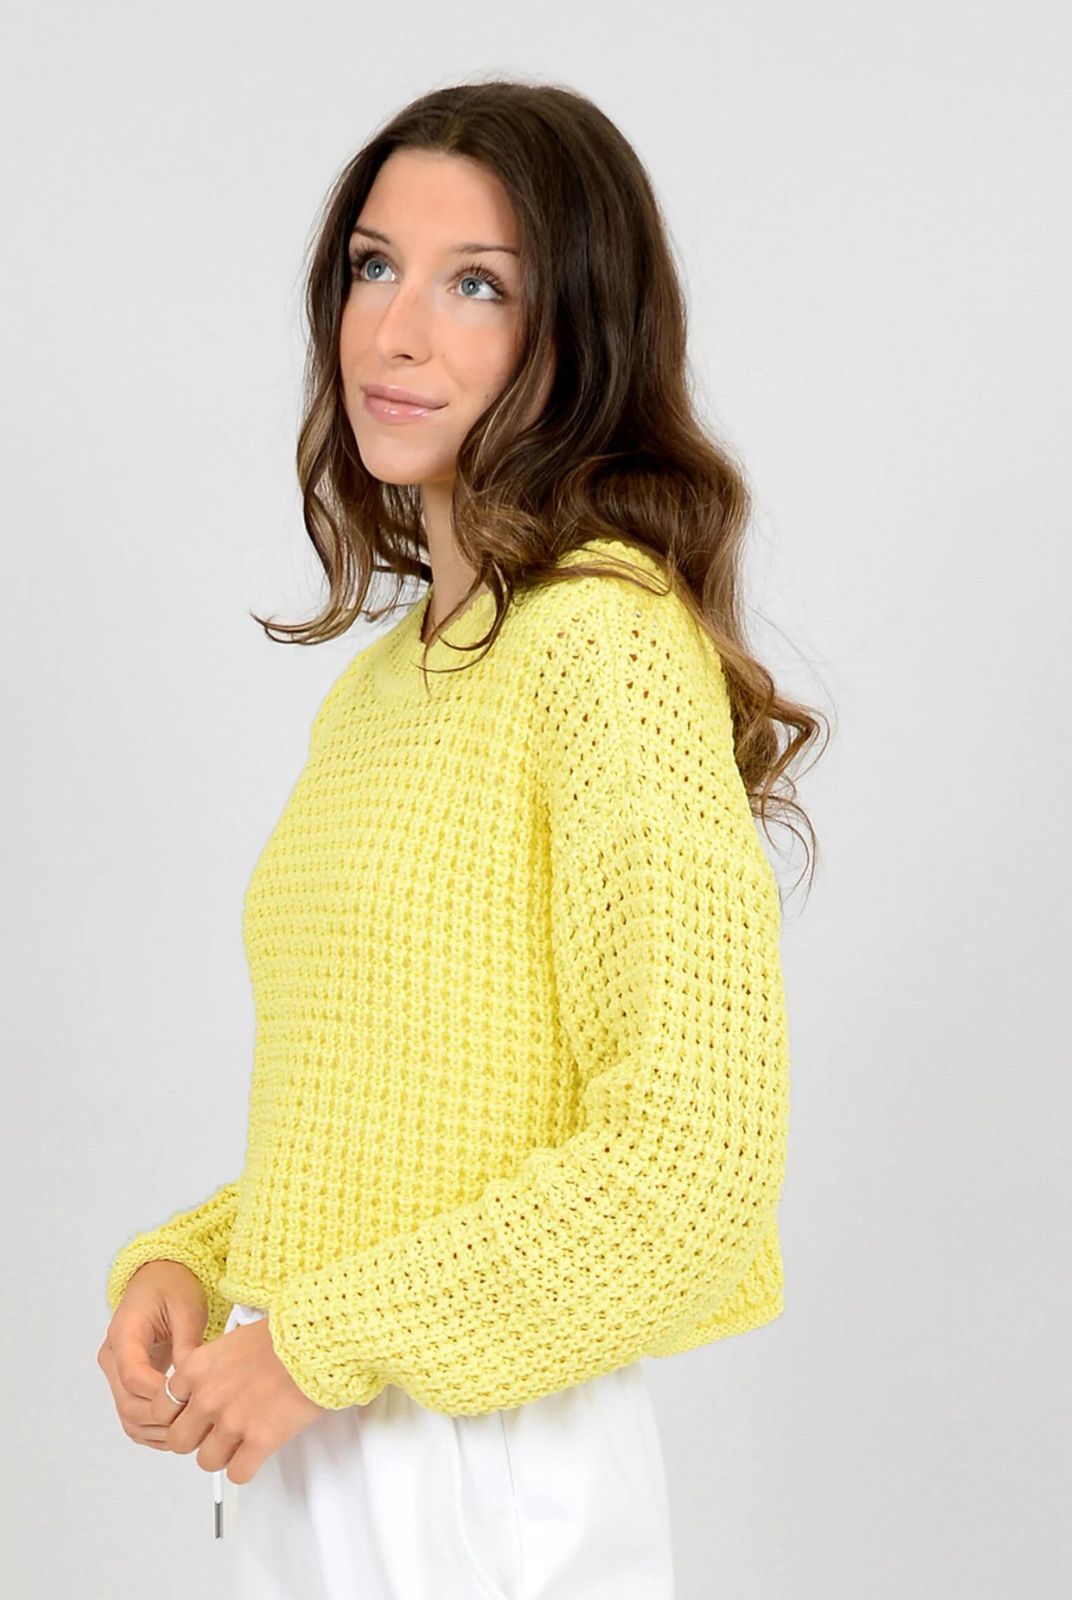 Darla Long Sleeve Crew Neck- Lemon. The the perfect lightweight sweater, in a gorgeous lemon to transition through the seasons! The cuteness of this sweater will be hard to top. Wear with a tank top or over a blouse for a different look.